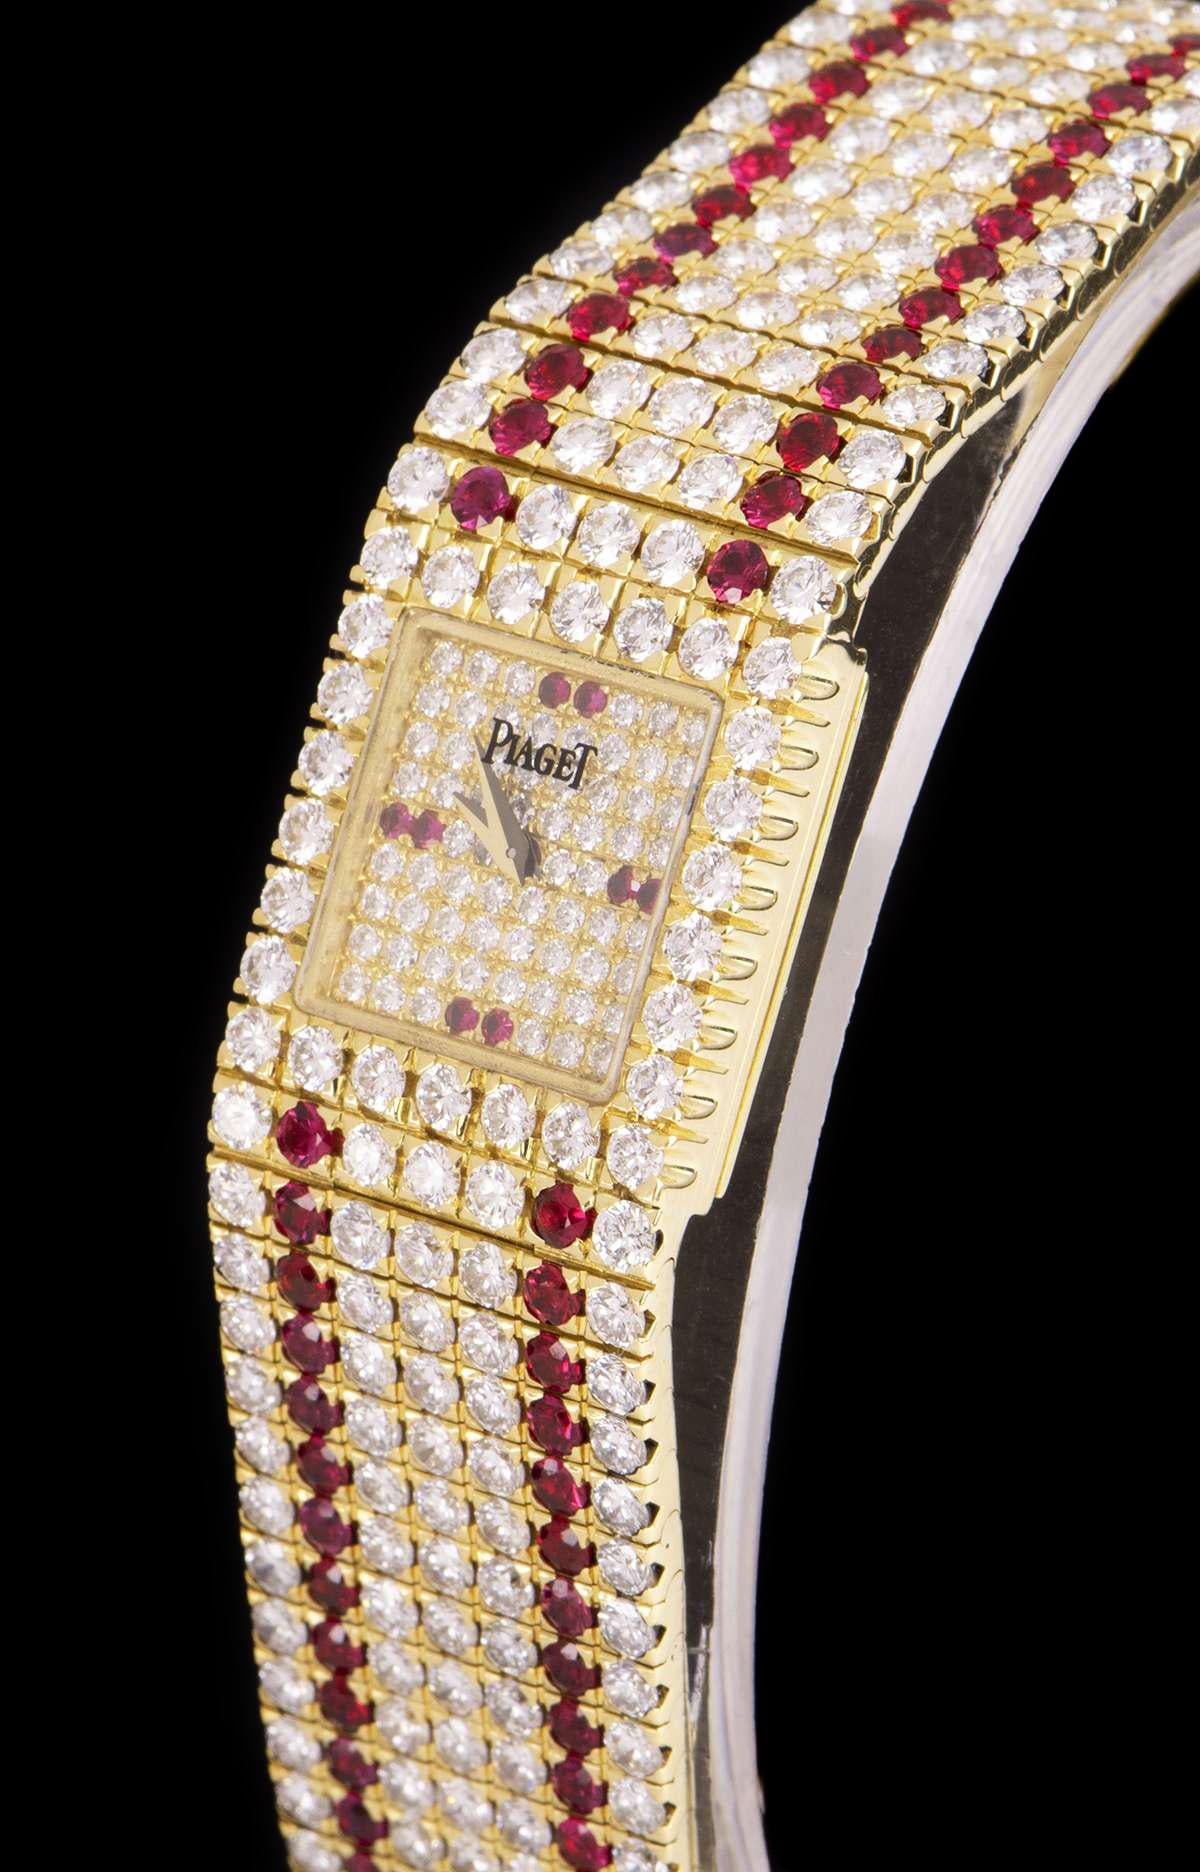 An 18k Yellow Gold Fully Loaded Vintage Ladies Wristwatch, pave diamond dial set with 2 round brilliant cut rubies at 3, 6, 9 and 12 0'clock, a fixed 18k yellow gold bezel set with 26 round brilliant cut diamonds, an 18k yellow gold jewellery style